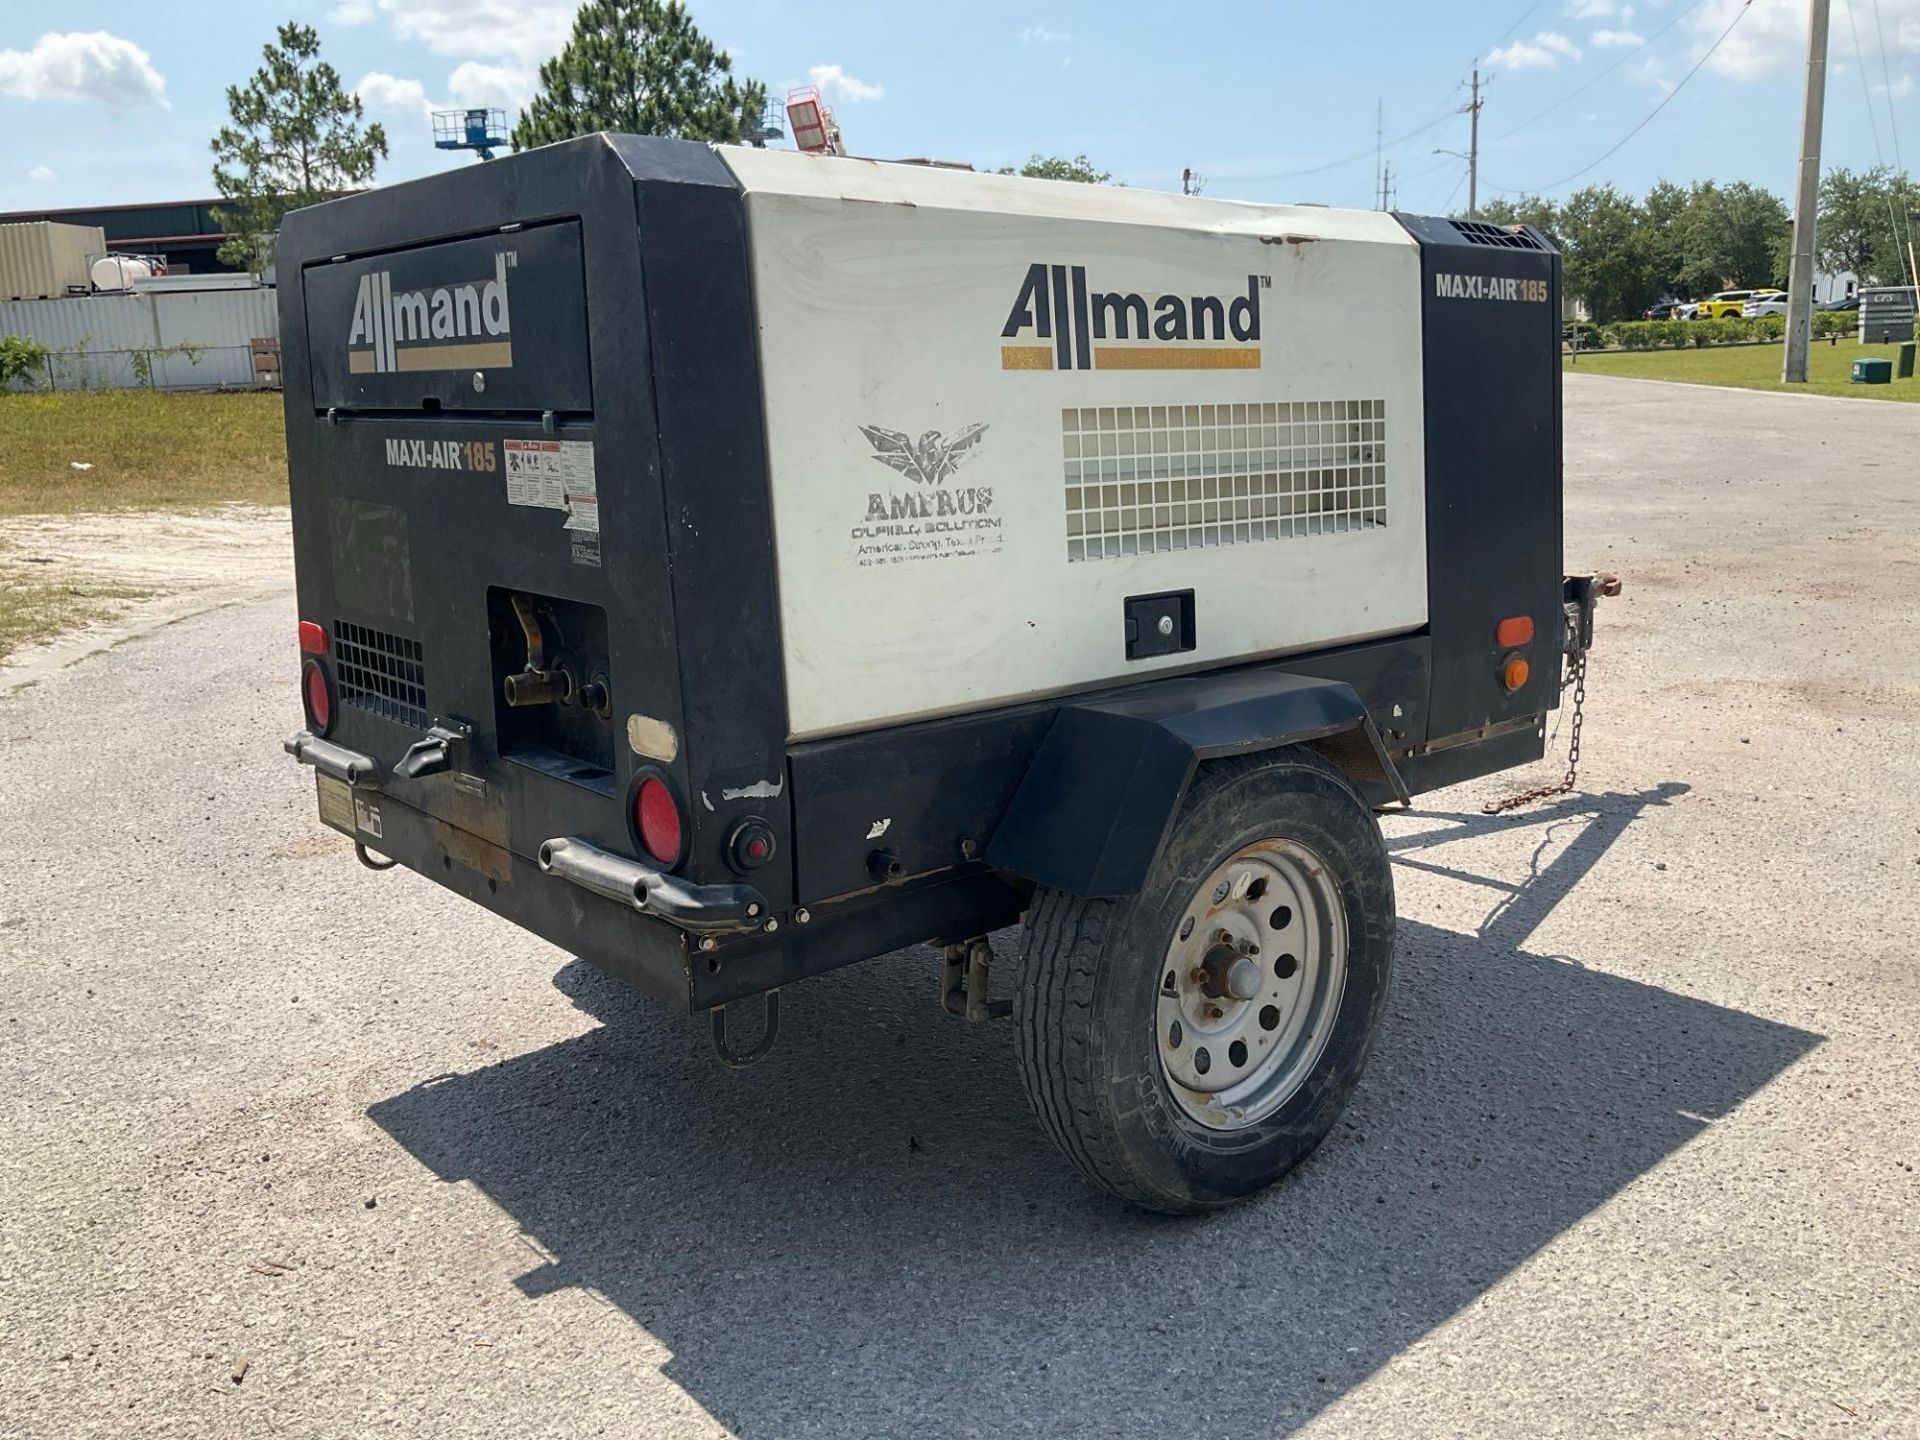 2018/2019 ALLMAND MAXI-POWER MA185-6E1 COMPRESSOR, DIESEL, TRAILER MOUNTED, NORMAL OPERATING - Image 8 of 14